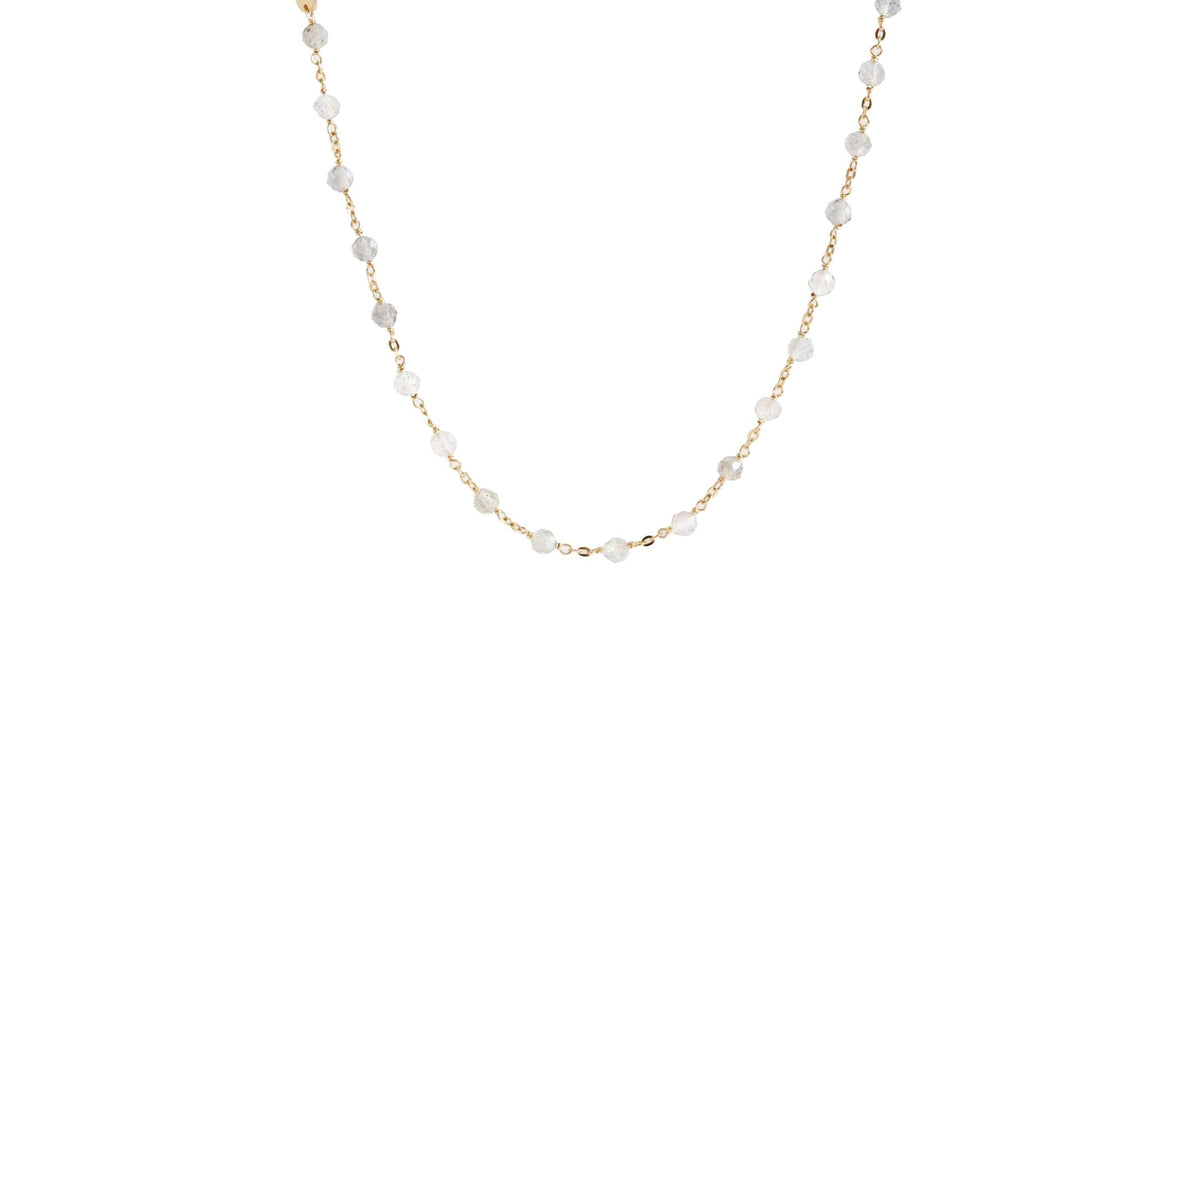 ICONIC SHORT BEADED NECKLACE - RAINBOW MOONSTONE &amp; GOLD 16-20&quot; - SO PRETTY CARA COTTER